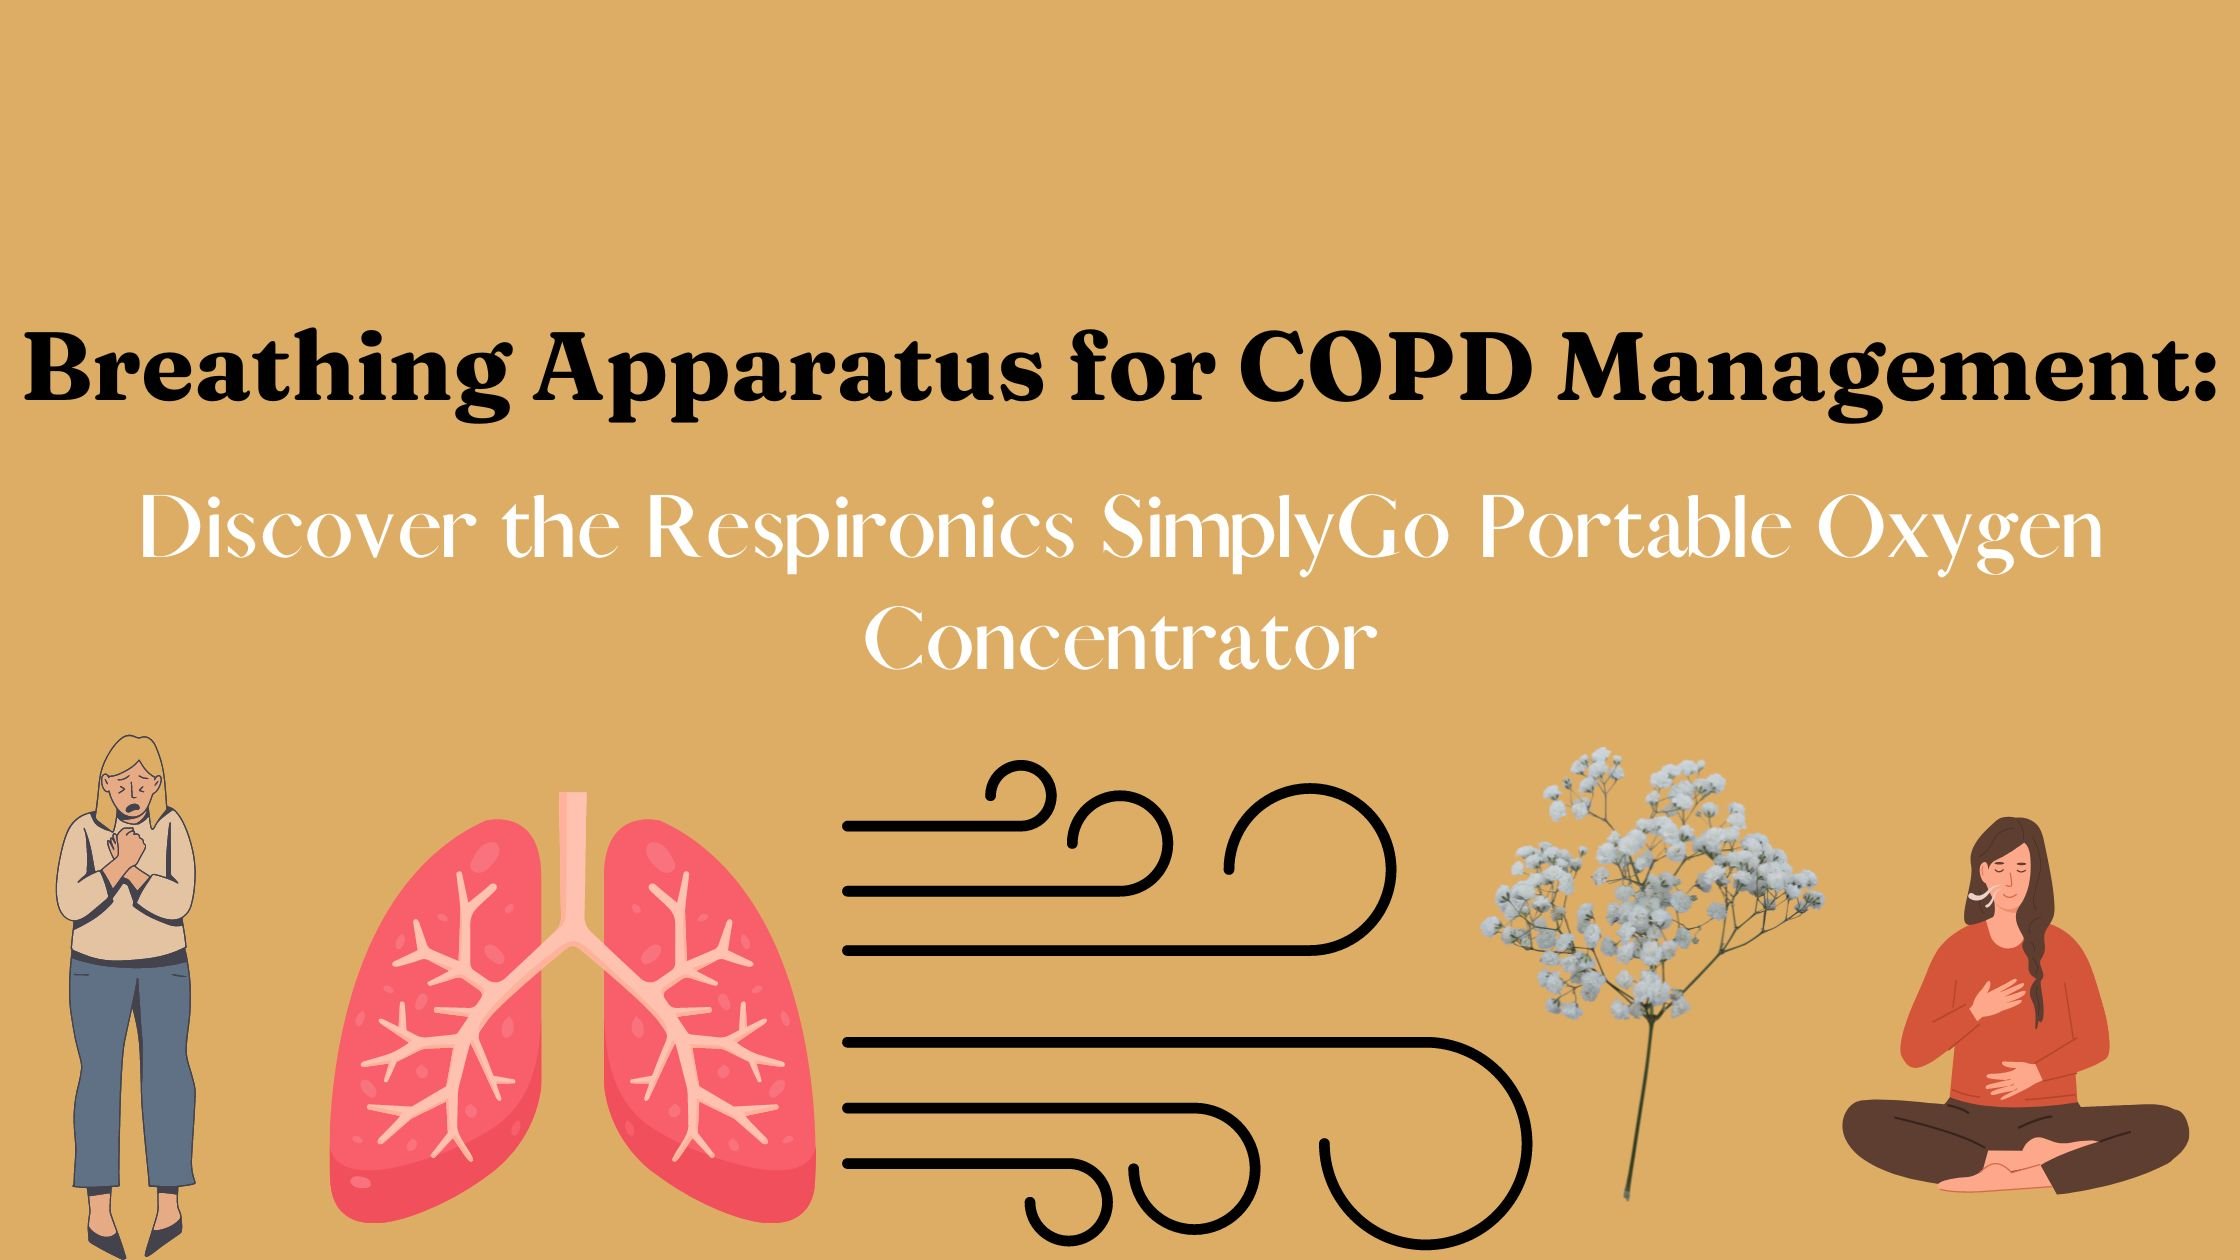 Breathing Apparatus for COPD Management Discover the Respironics SimplyGo Portable Oxygen Concentrator